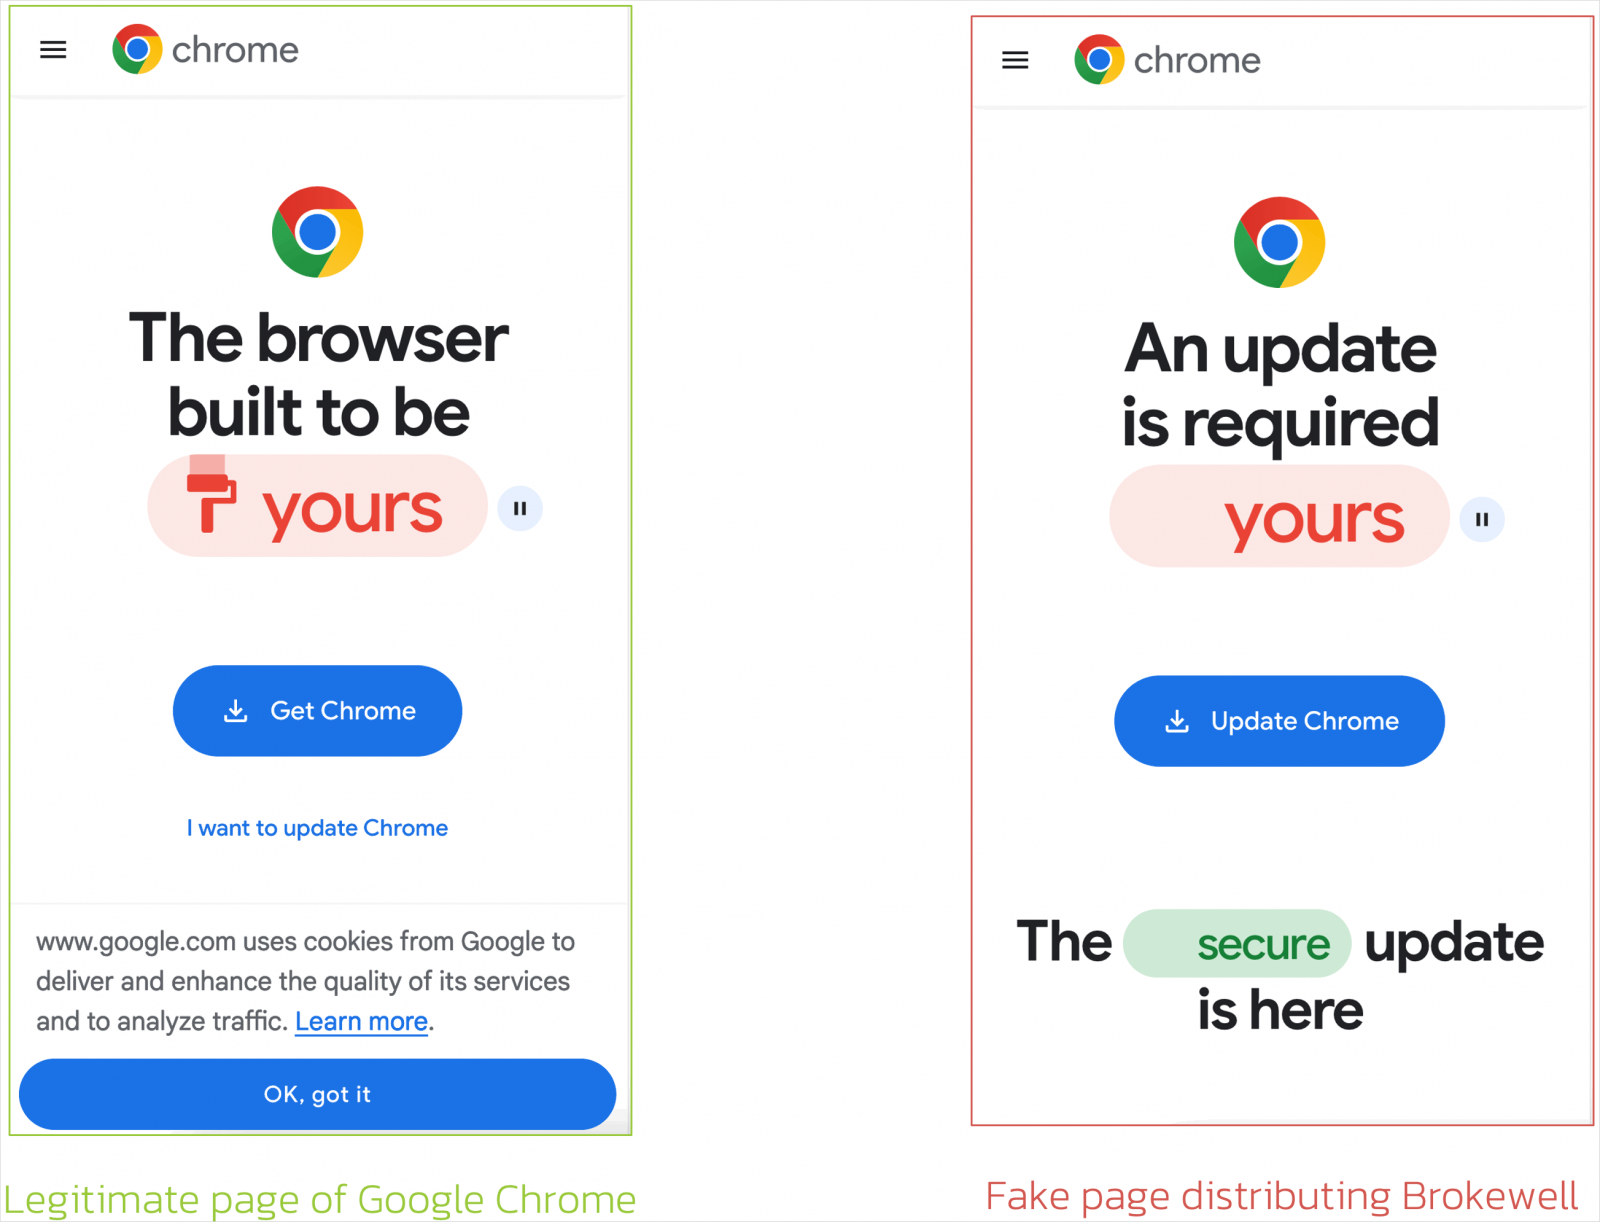 Legitimate (left) and fake (right) Chrome update pages